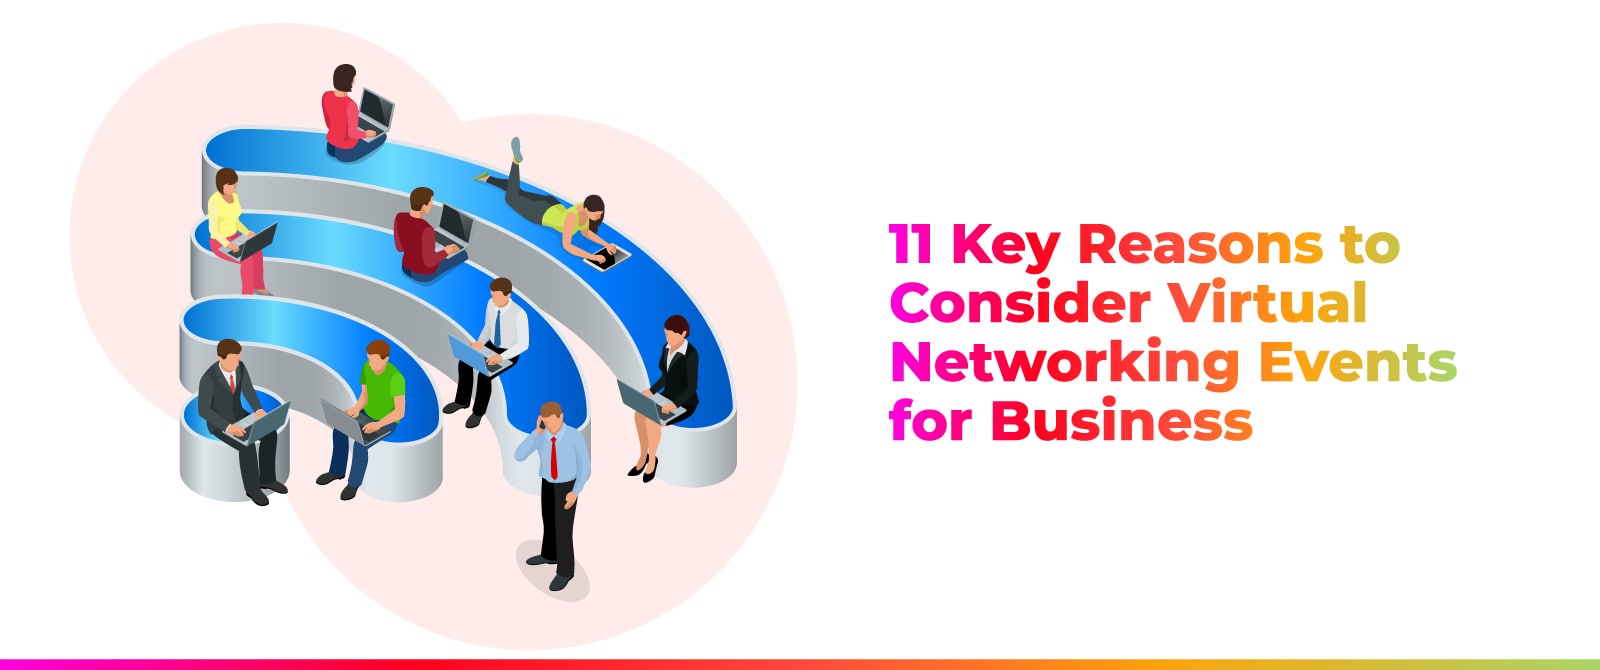 11 Key Reasons to Consider Virtual Networking Events for Business